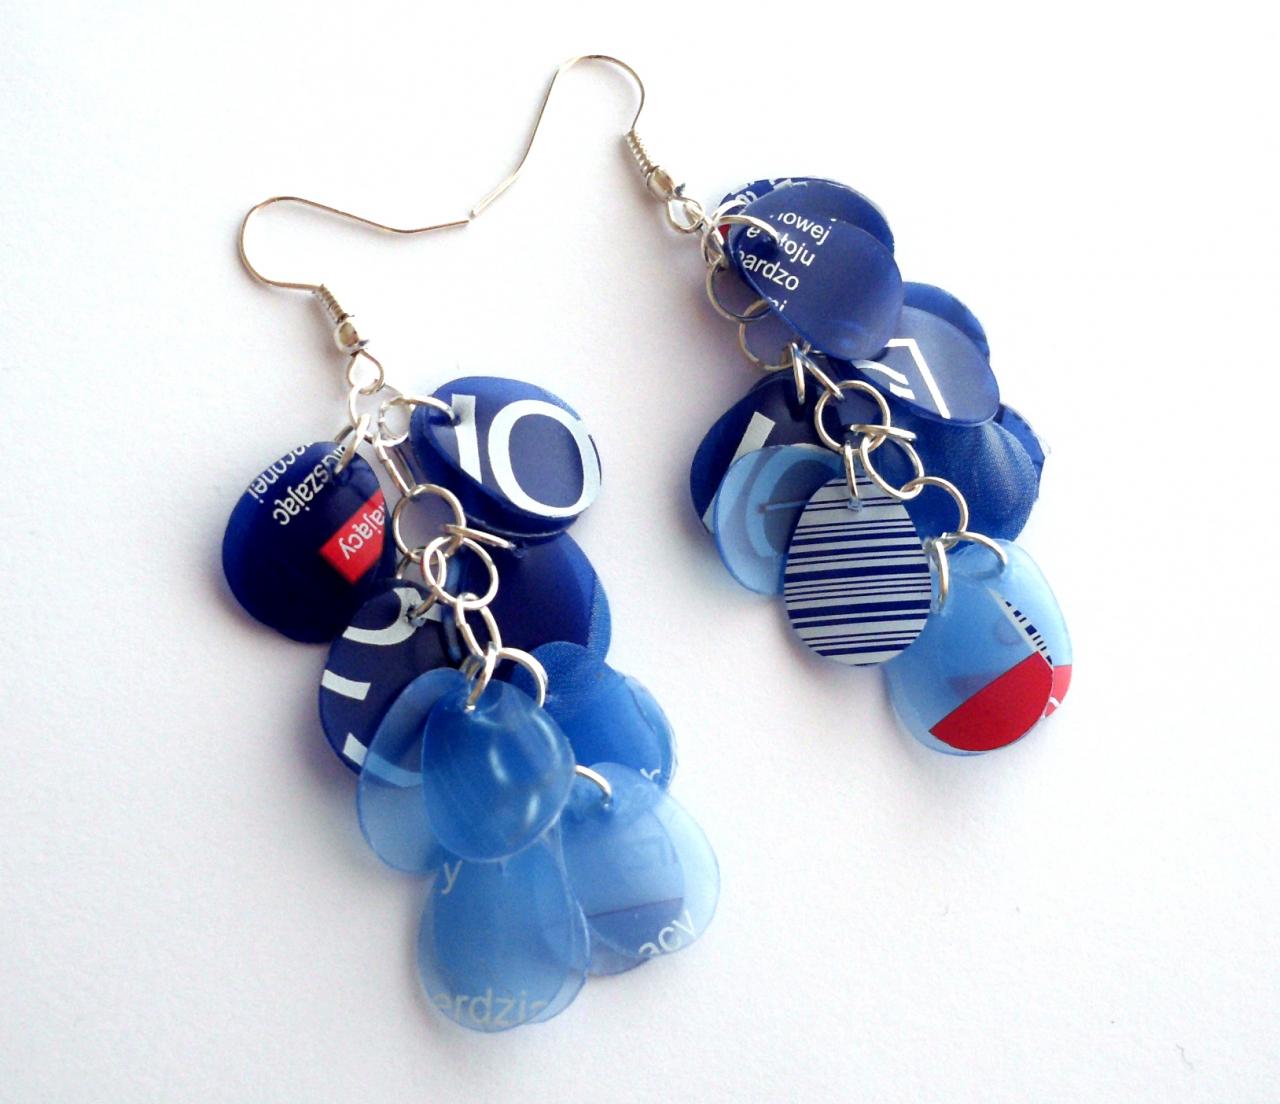 Blue Long Ecofriendly Earrings Made Of Recycled Plastic Bottle - Upcycled Jewelry, Sustainable, Modern